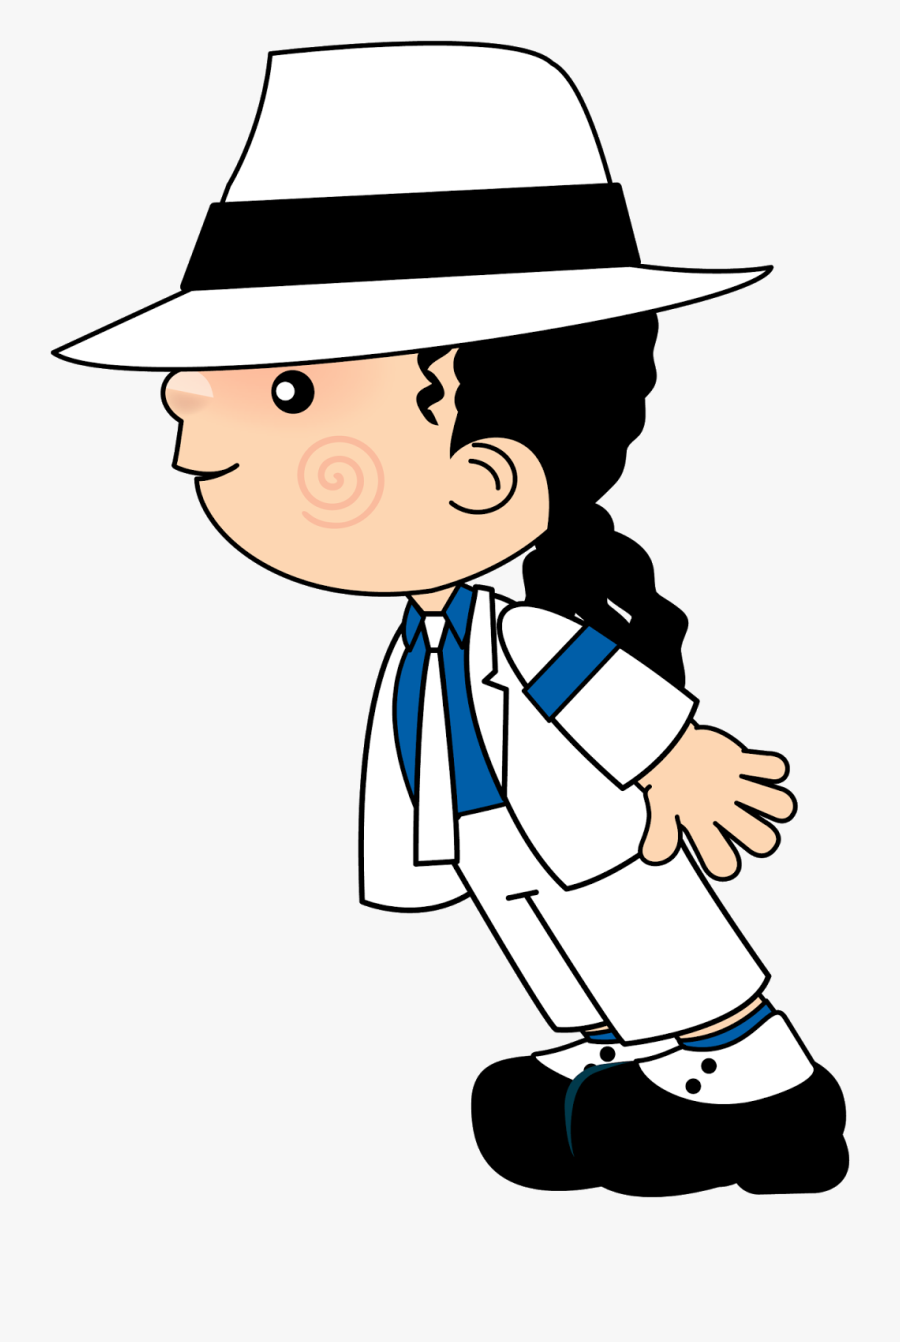 Clipart Of Jackson, Stopping And Comprar - Cartoon, Transparent Clipart